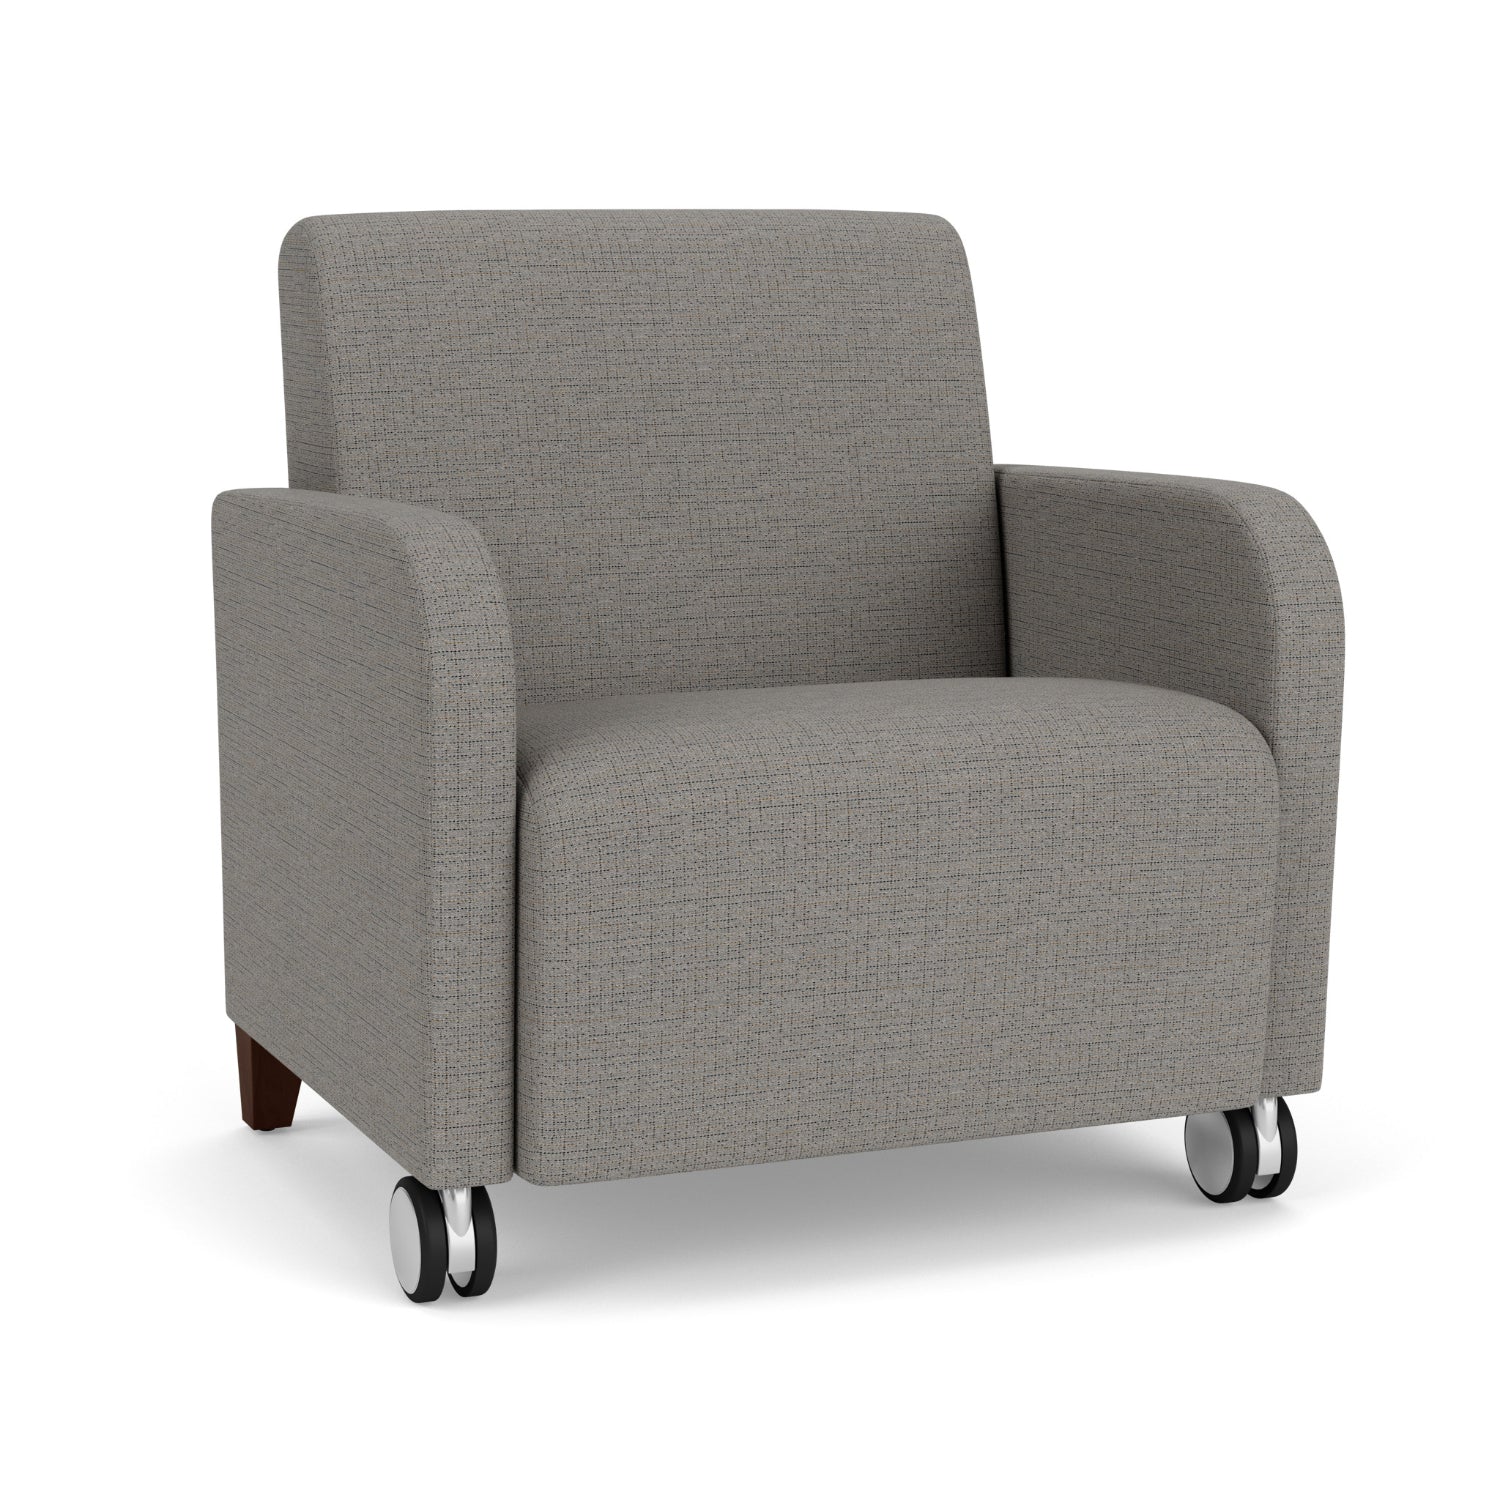 Siena Collection Reception Seating, Oversize Guest Chair with Front Casters, 500 lb. Capacity, Designer Fabric Upholstery, FREE SHIPPING